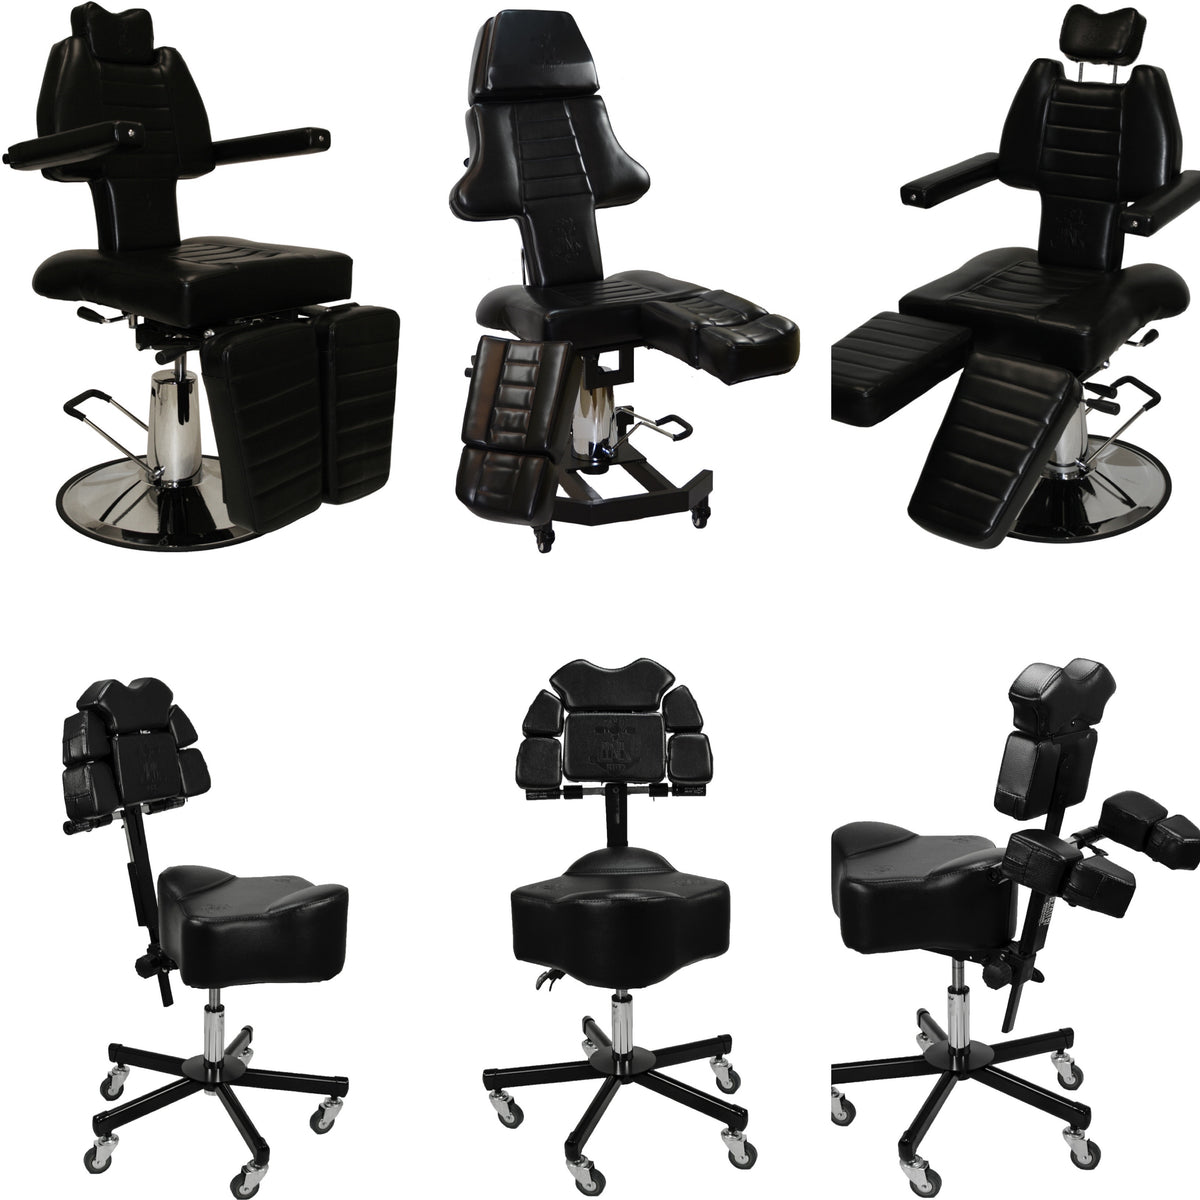 Tattoo Artist Chairs buy at Tattoo Gizmo